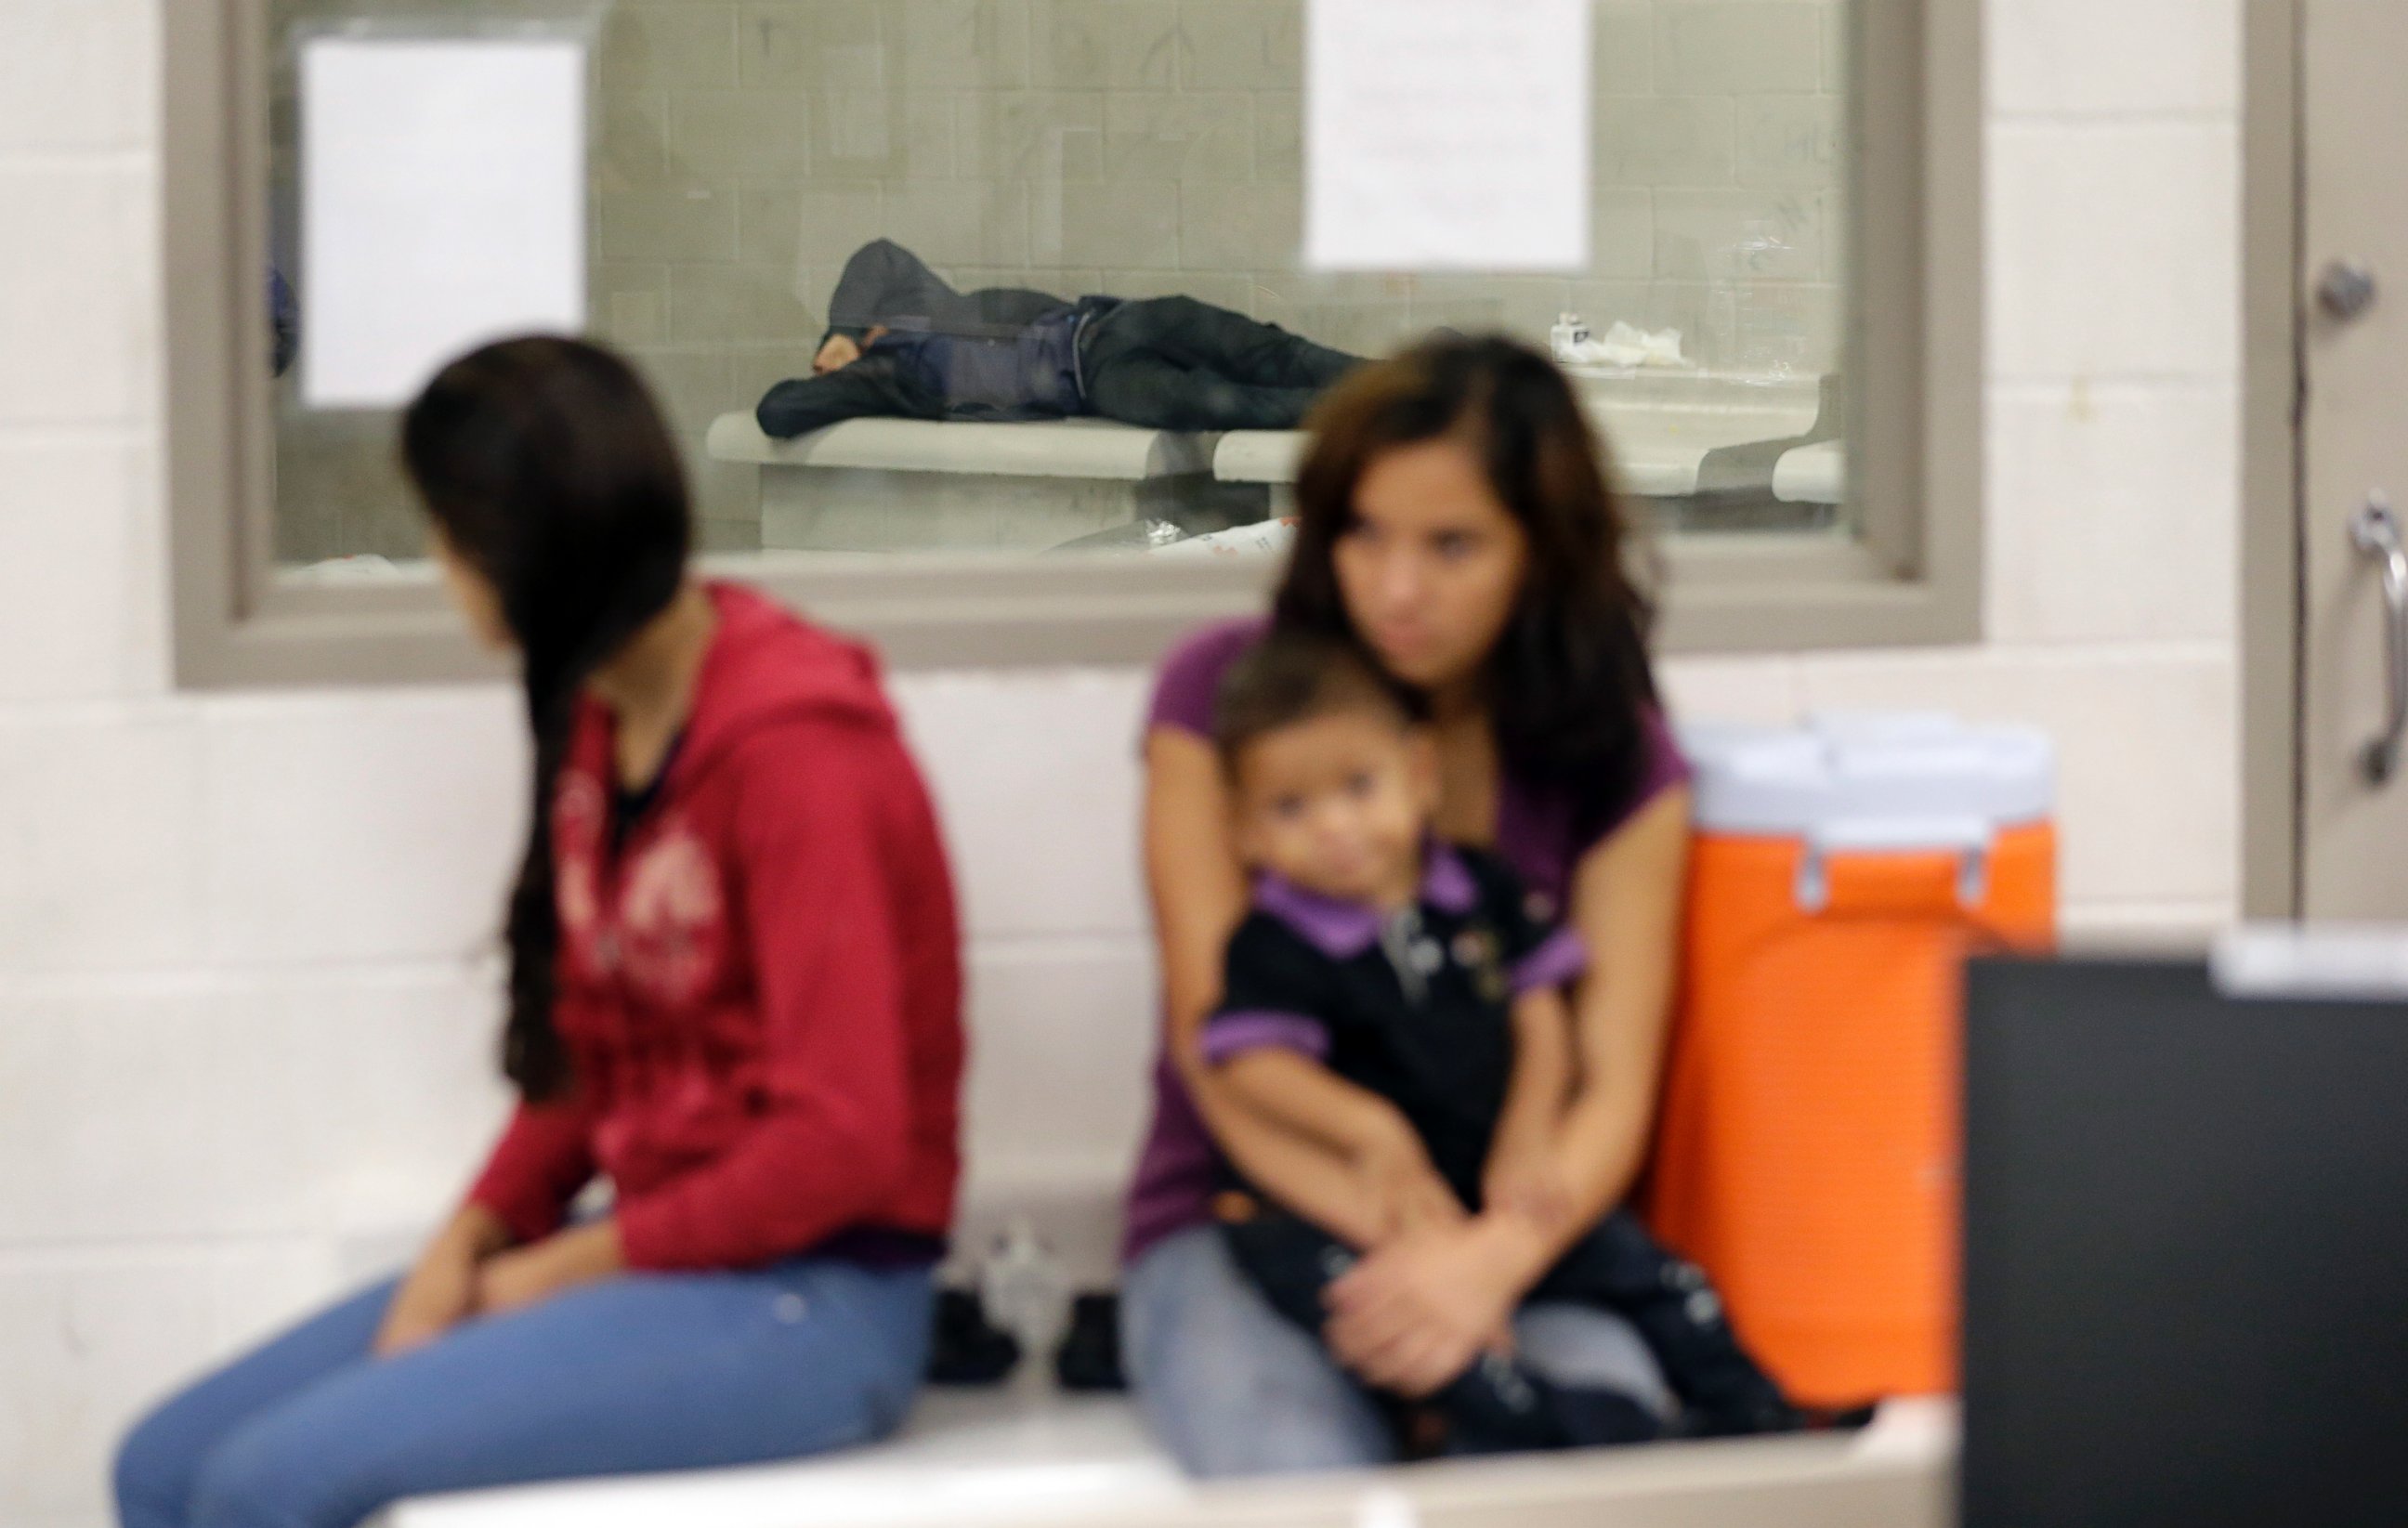 Detainees wait at a U.S. Customs and Border Protection processing facility, June 18, 2014, in Brownsville, Texas.